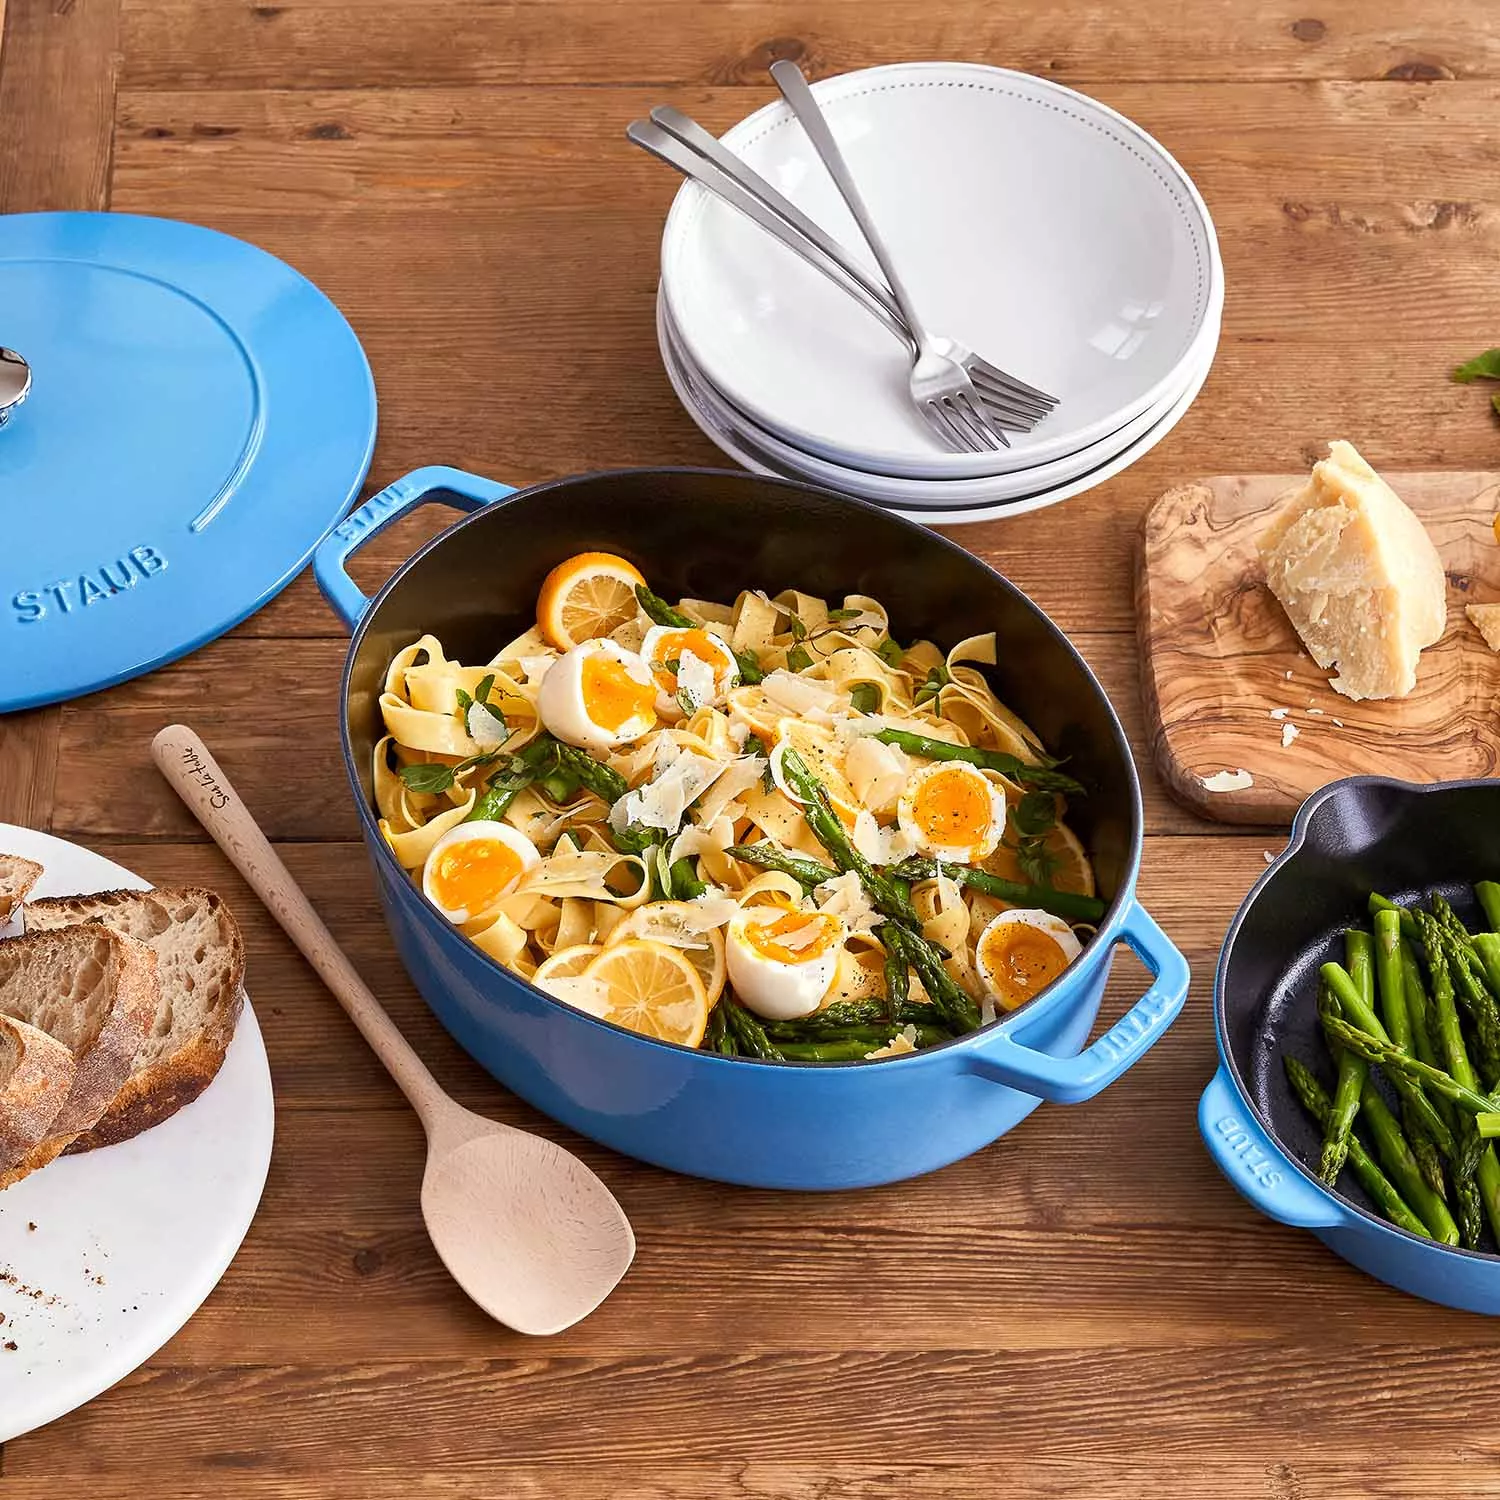 STAUB Cast Iron Fry Pan Set - 6.25 & 10.25 - Gifts and Gadgets